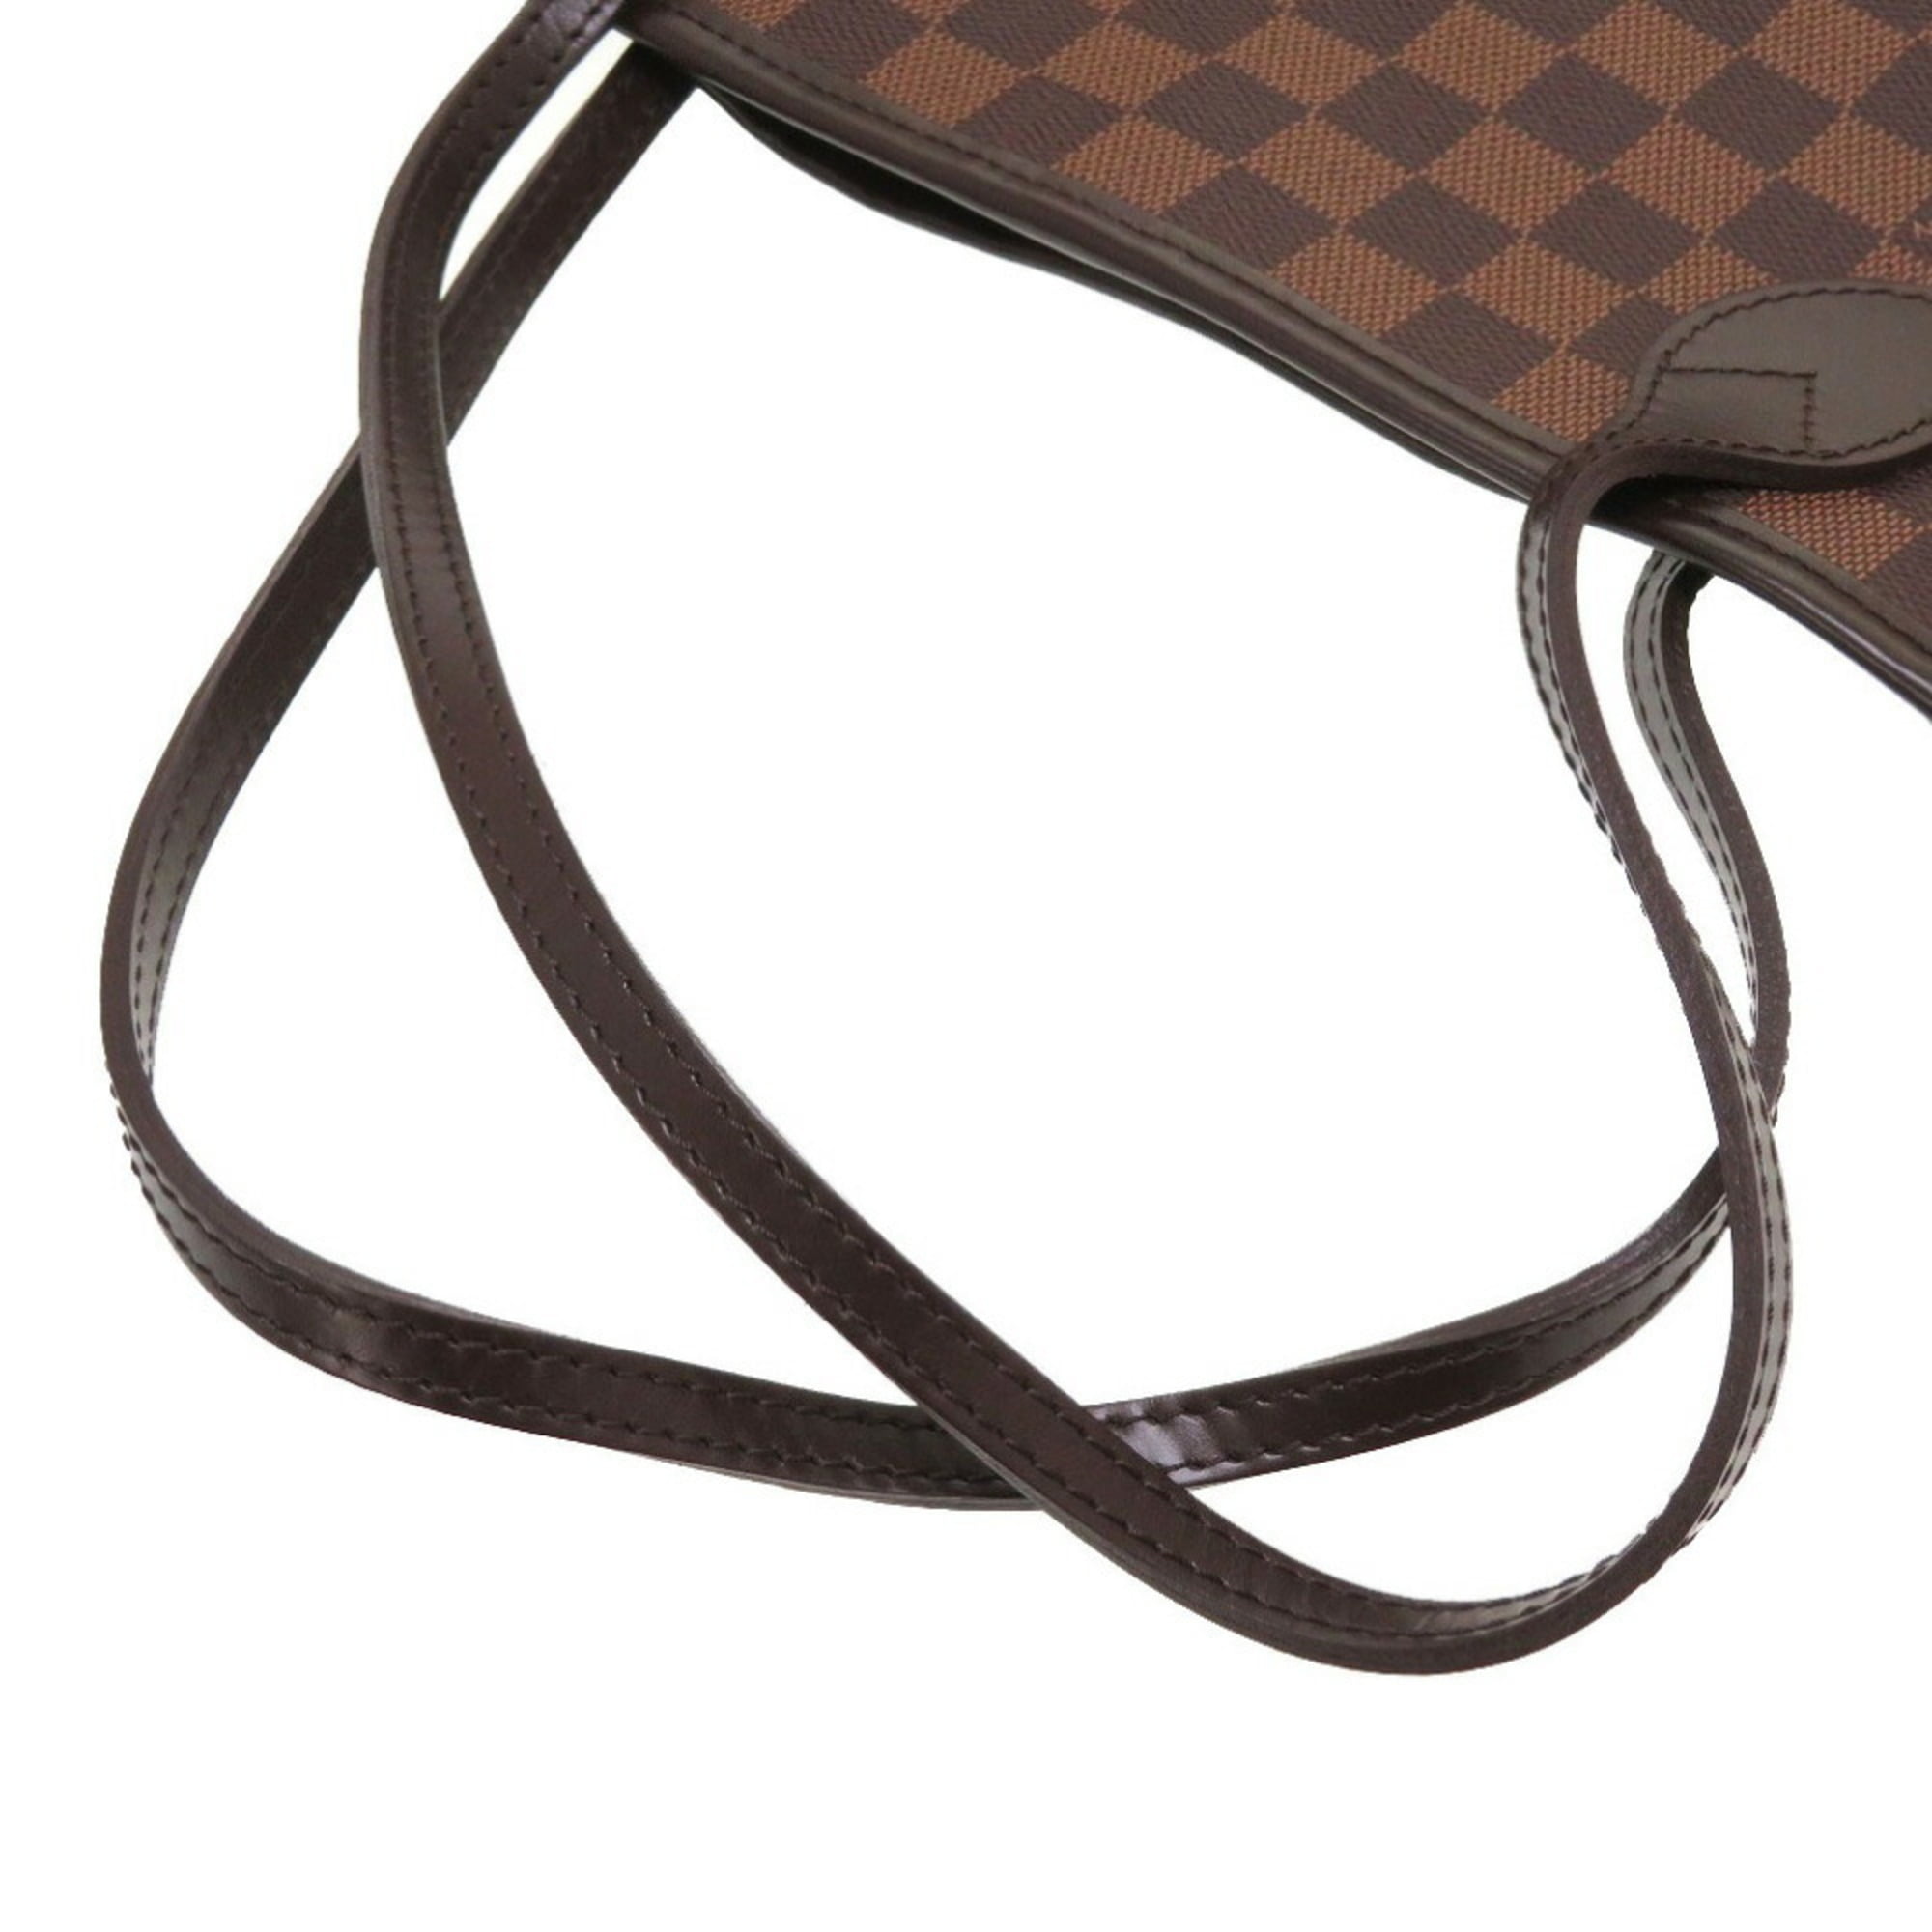 Used LOUIS VUITTON Damier Ebene Neverfull GM Tote Bag N51106 LV Auth Used VG